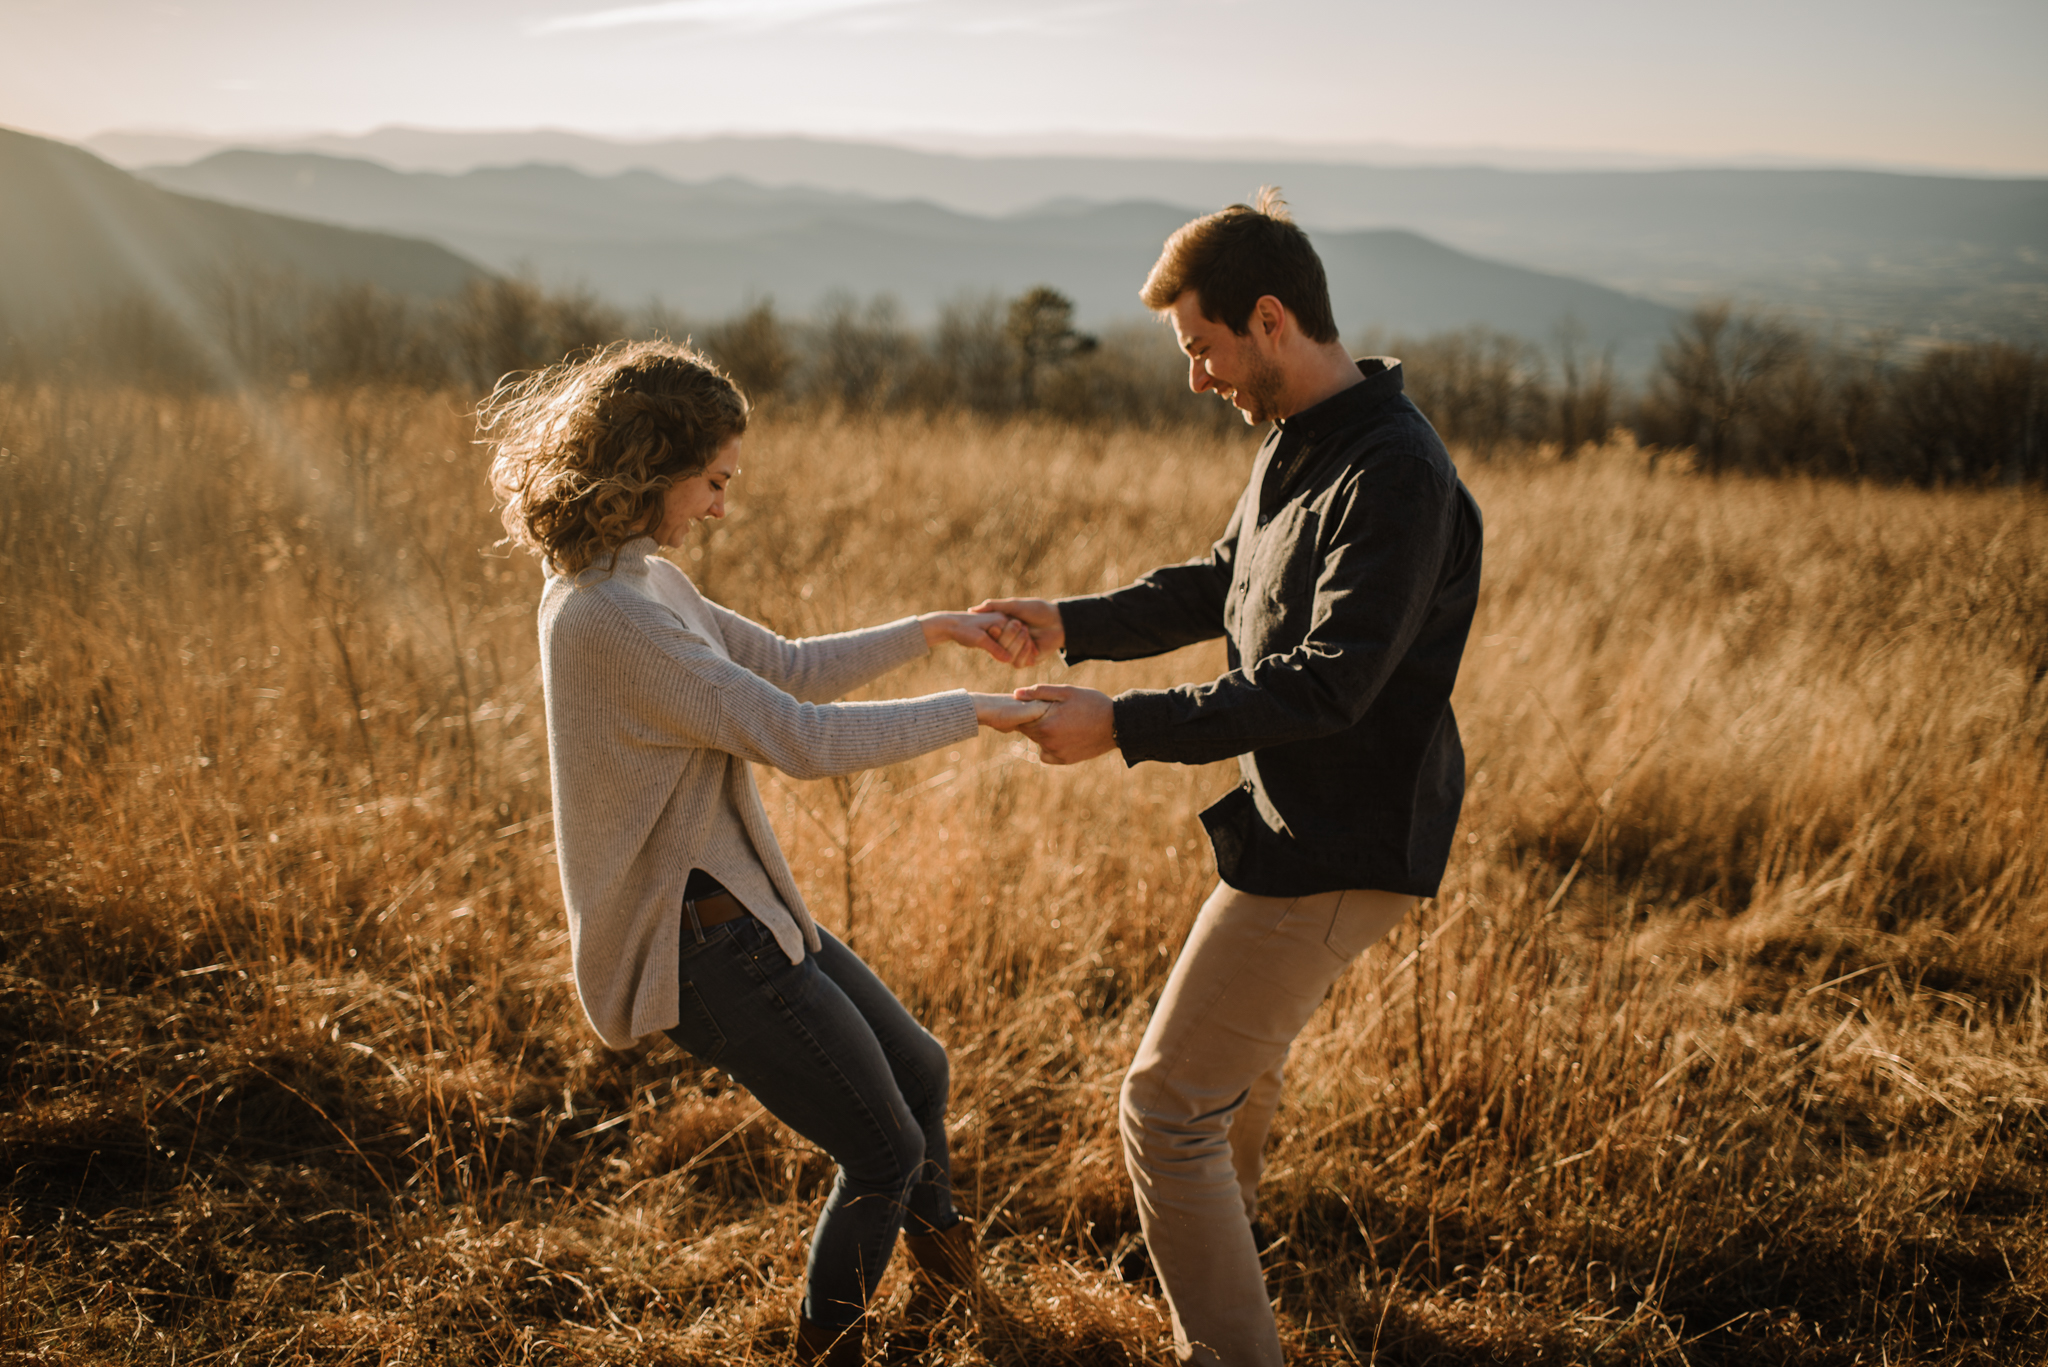 Alli and Mitchell - Shenandoah National Park Adventure Winter Engagement Session on Skyline Drive - White Sails Creative Elopement Photography_45.JPG